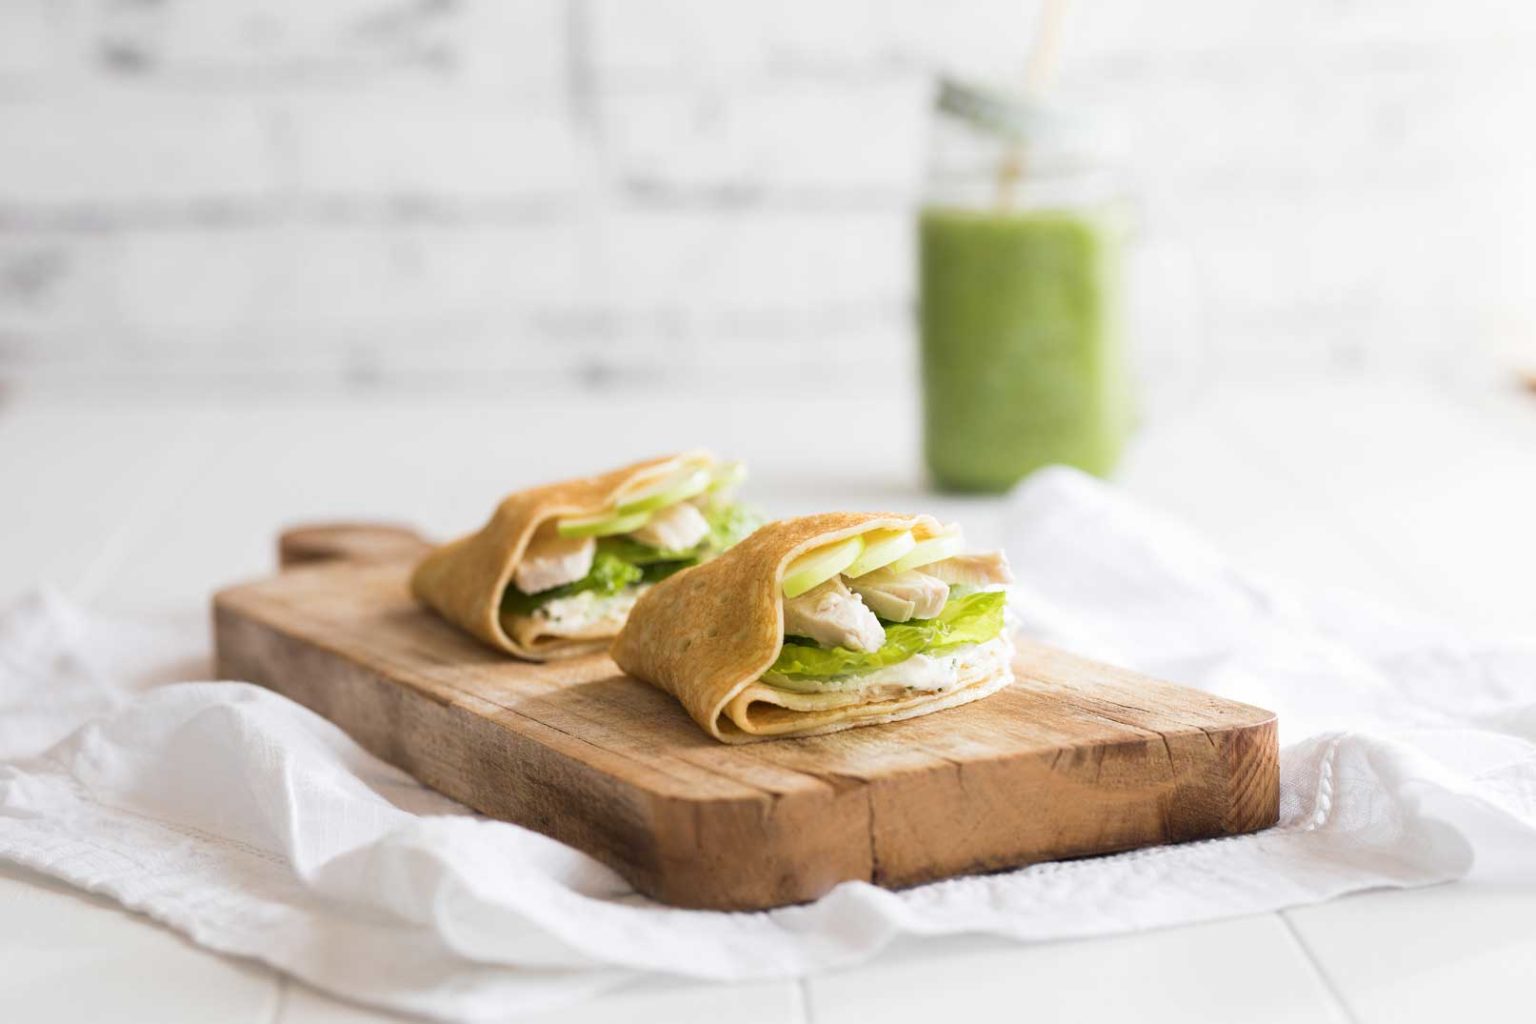 Two turkey, apple and avocado crepes on a wooden serving board sitting on white cloth napkin with a green smoothie in a glass jar in the background.